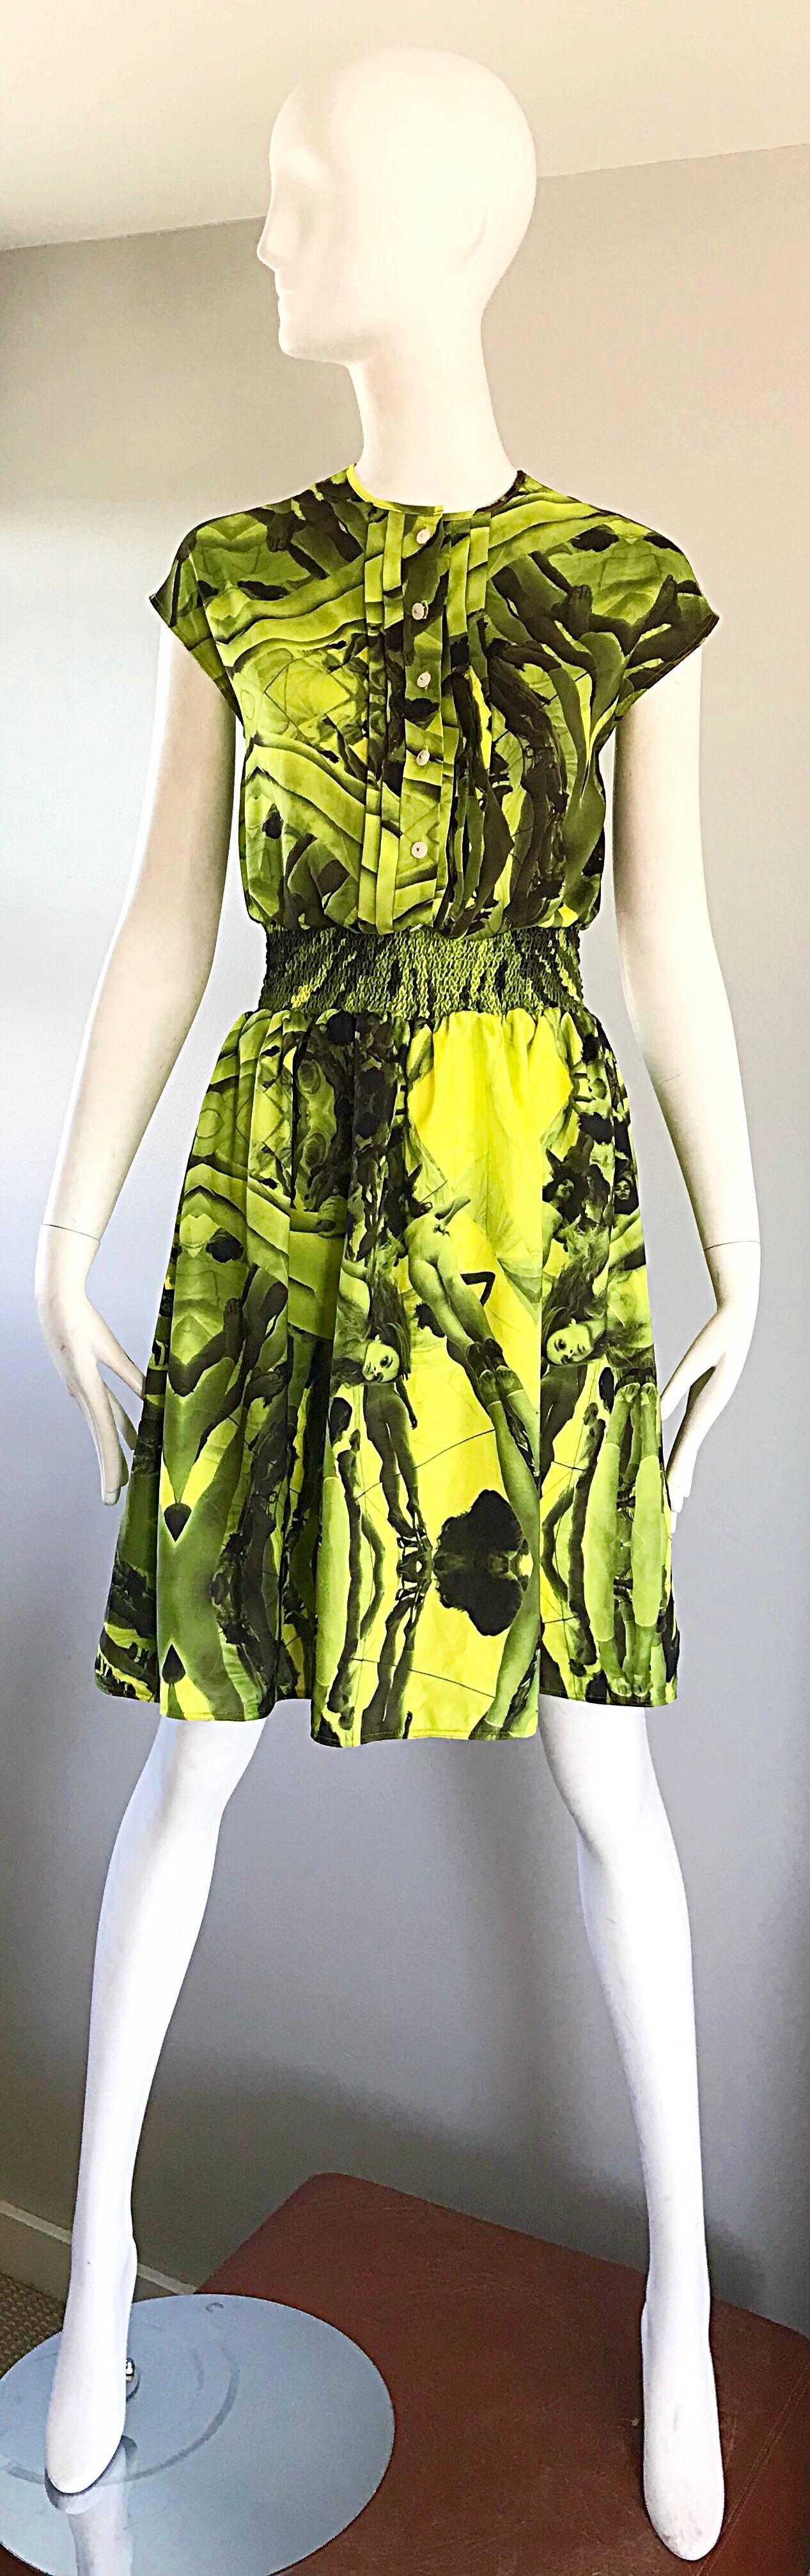 Incredible brand new with tags ASTIER neon yellow, grey and black novelty print silk dress! Features nude women in pantyhose and high heels throughout, mixed with abstract prints. Buttons up the front bodice. Elastic waistband at waist stretches to